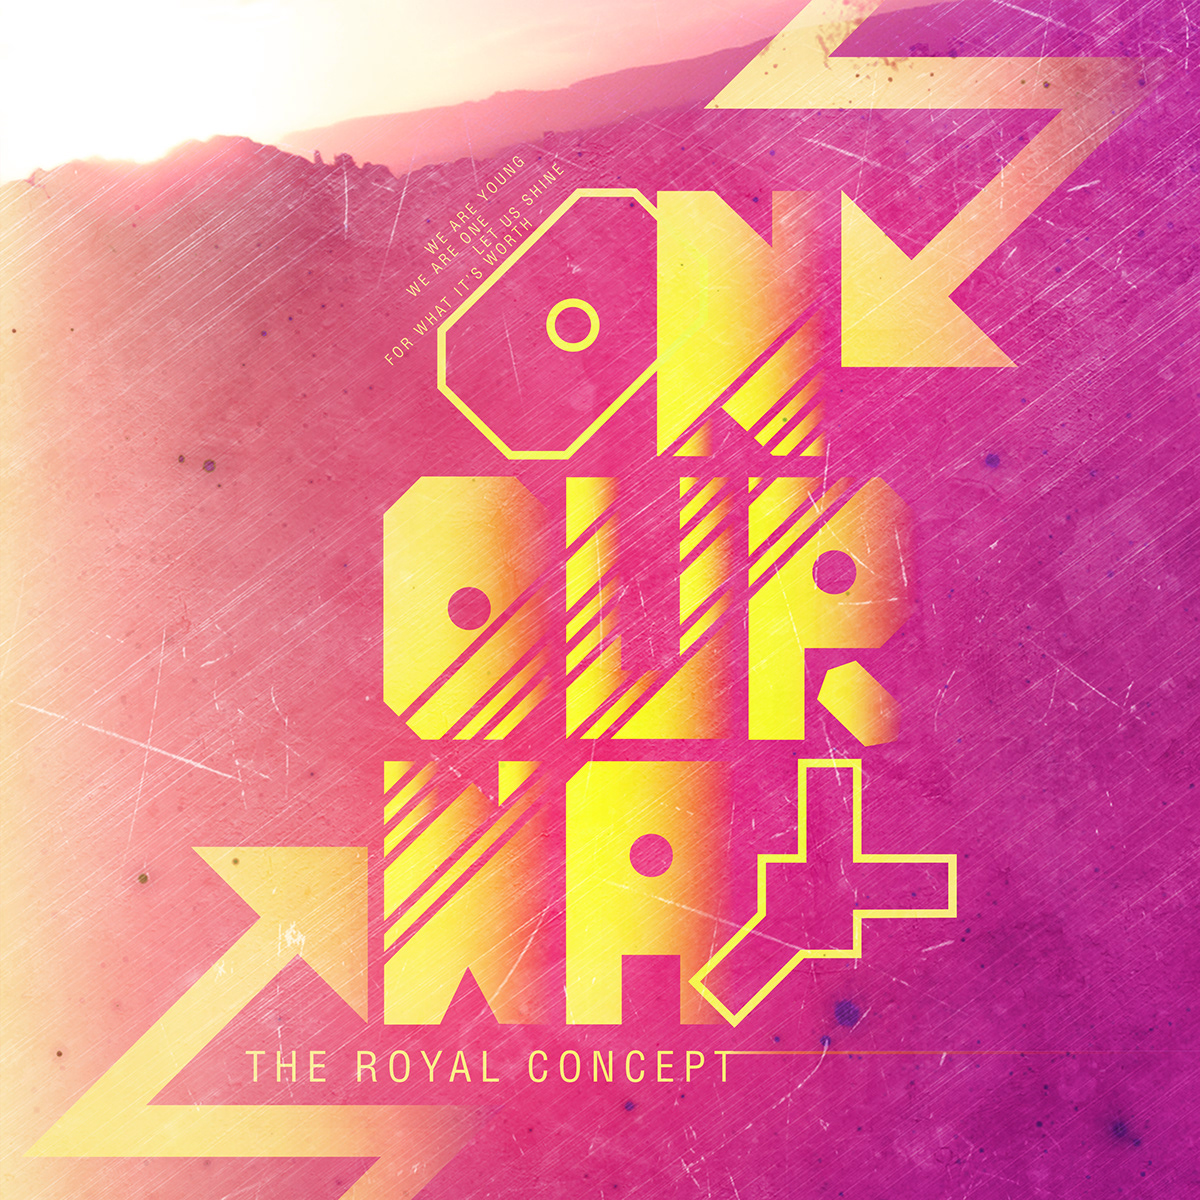 ON OUR WAY The Royal Concept artwork poster flyer